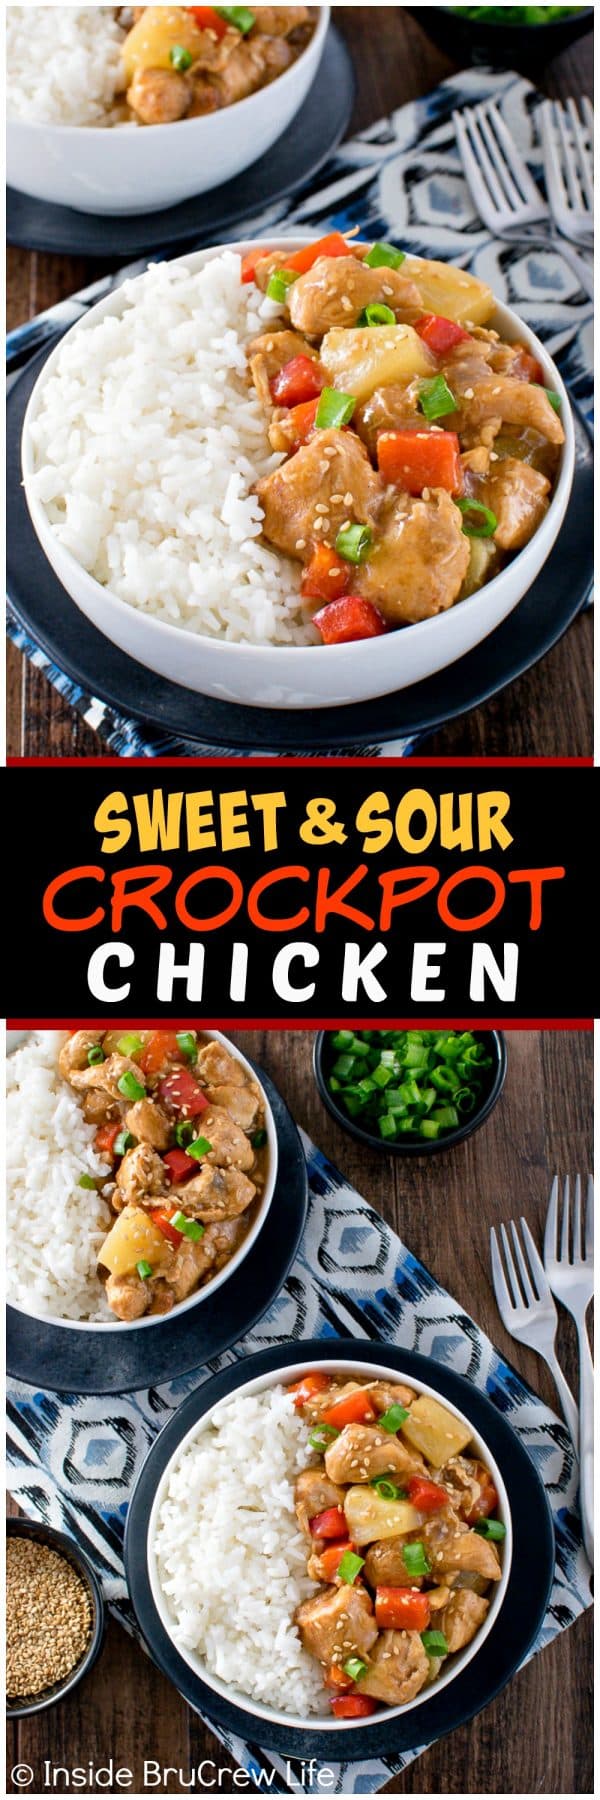 Two pictures of sweet and sour crockpot chicken collaged together with a black text box